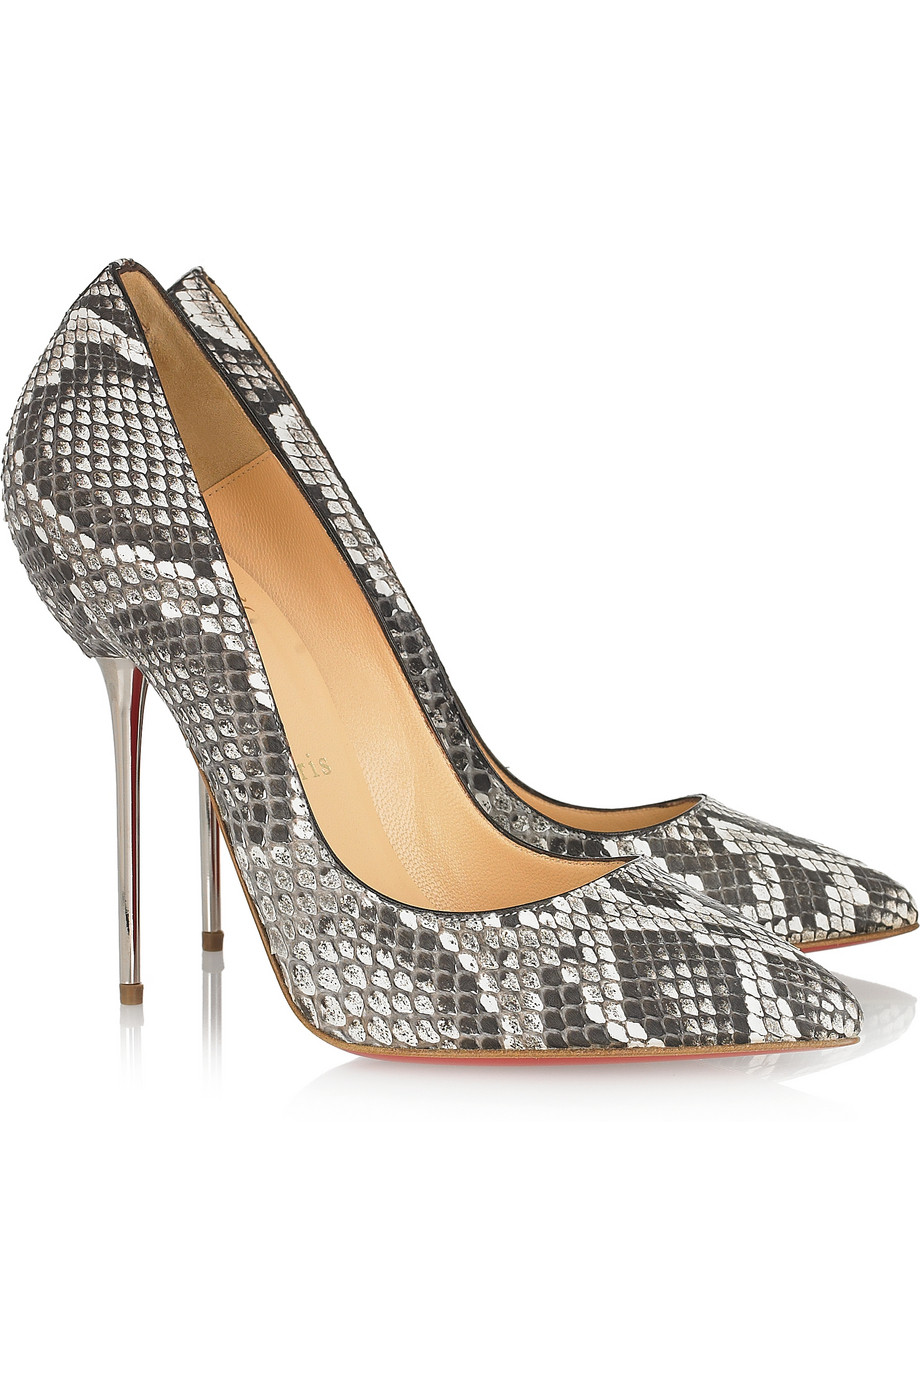 louboutin python pumps for Sale,Up To OFF 72%